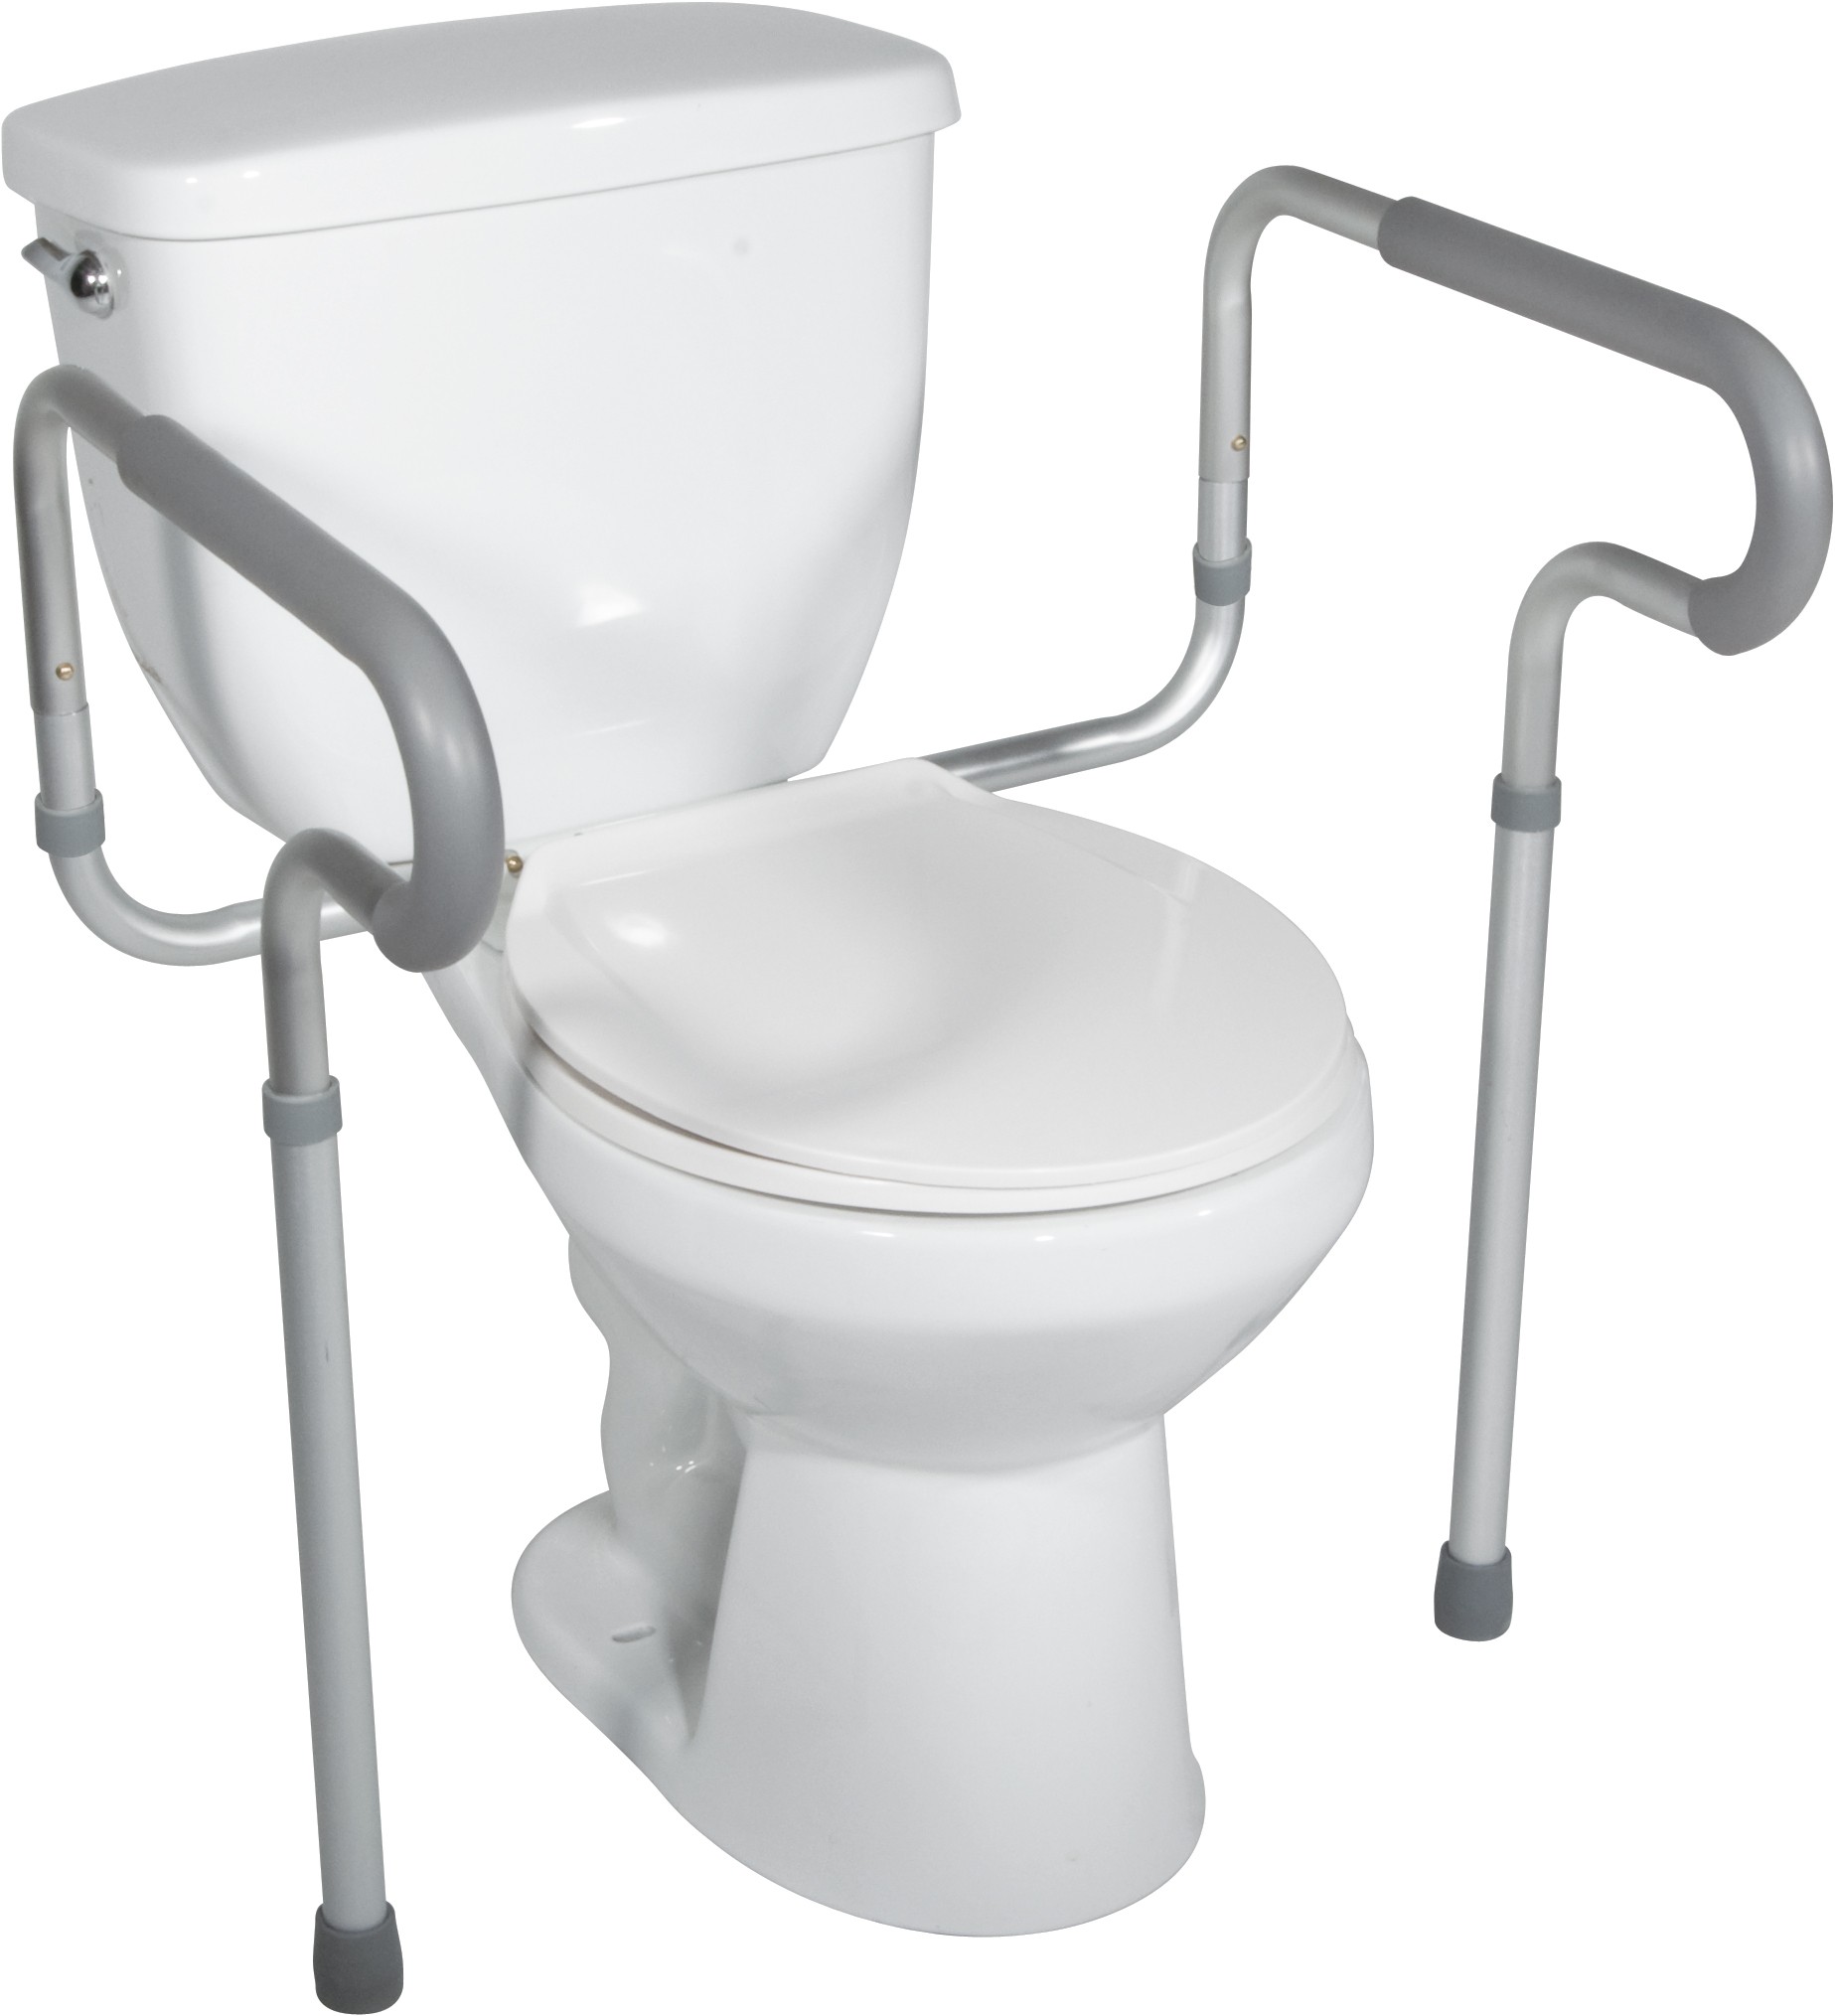 Toilet/Commode Safety Rails